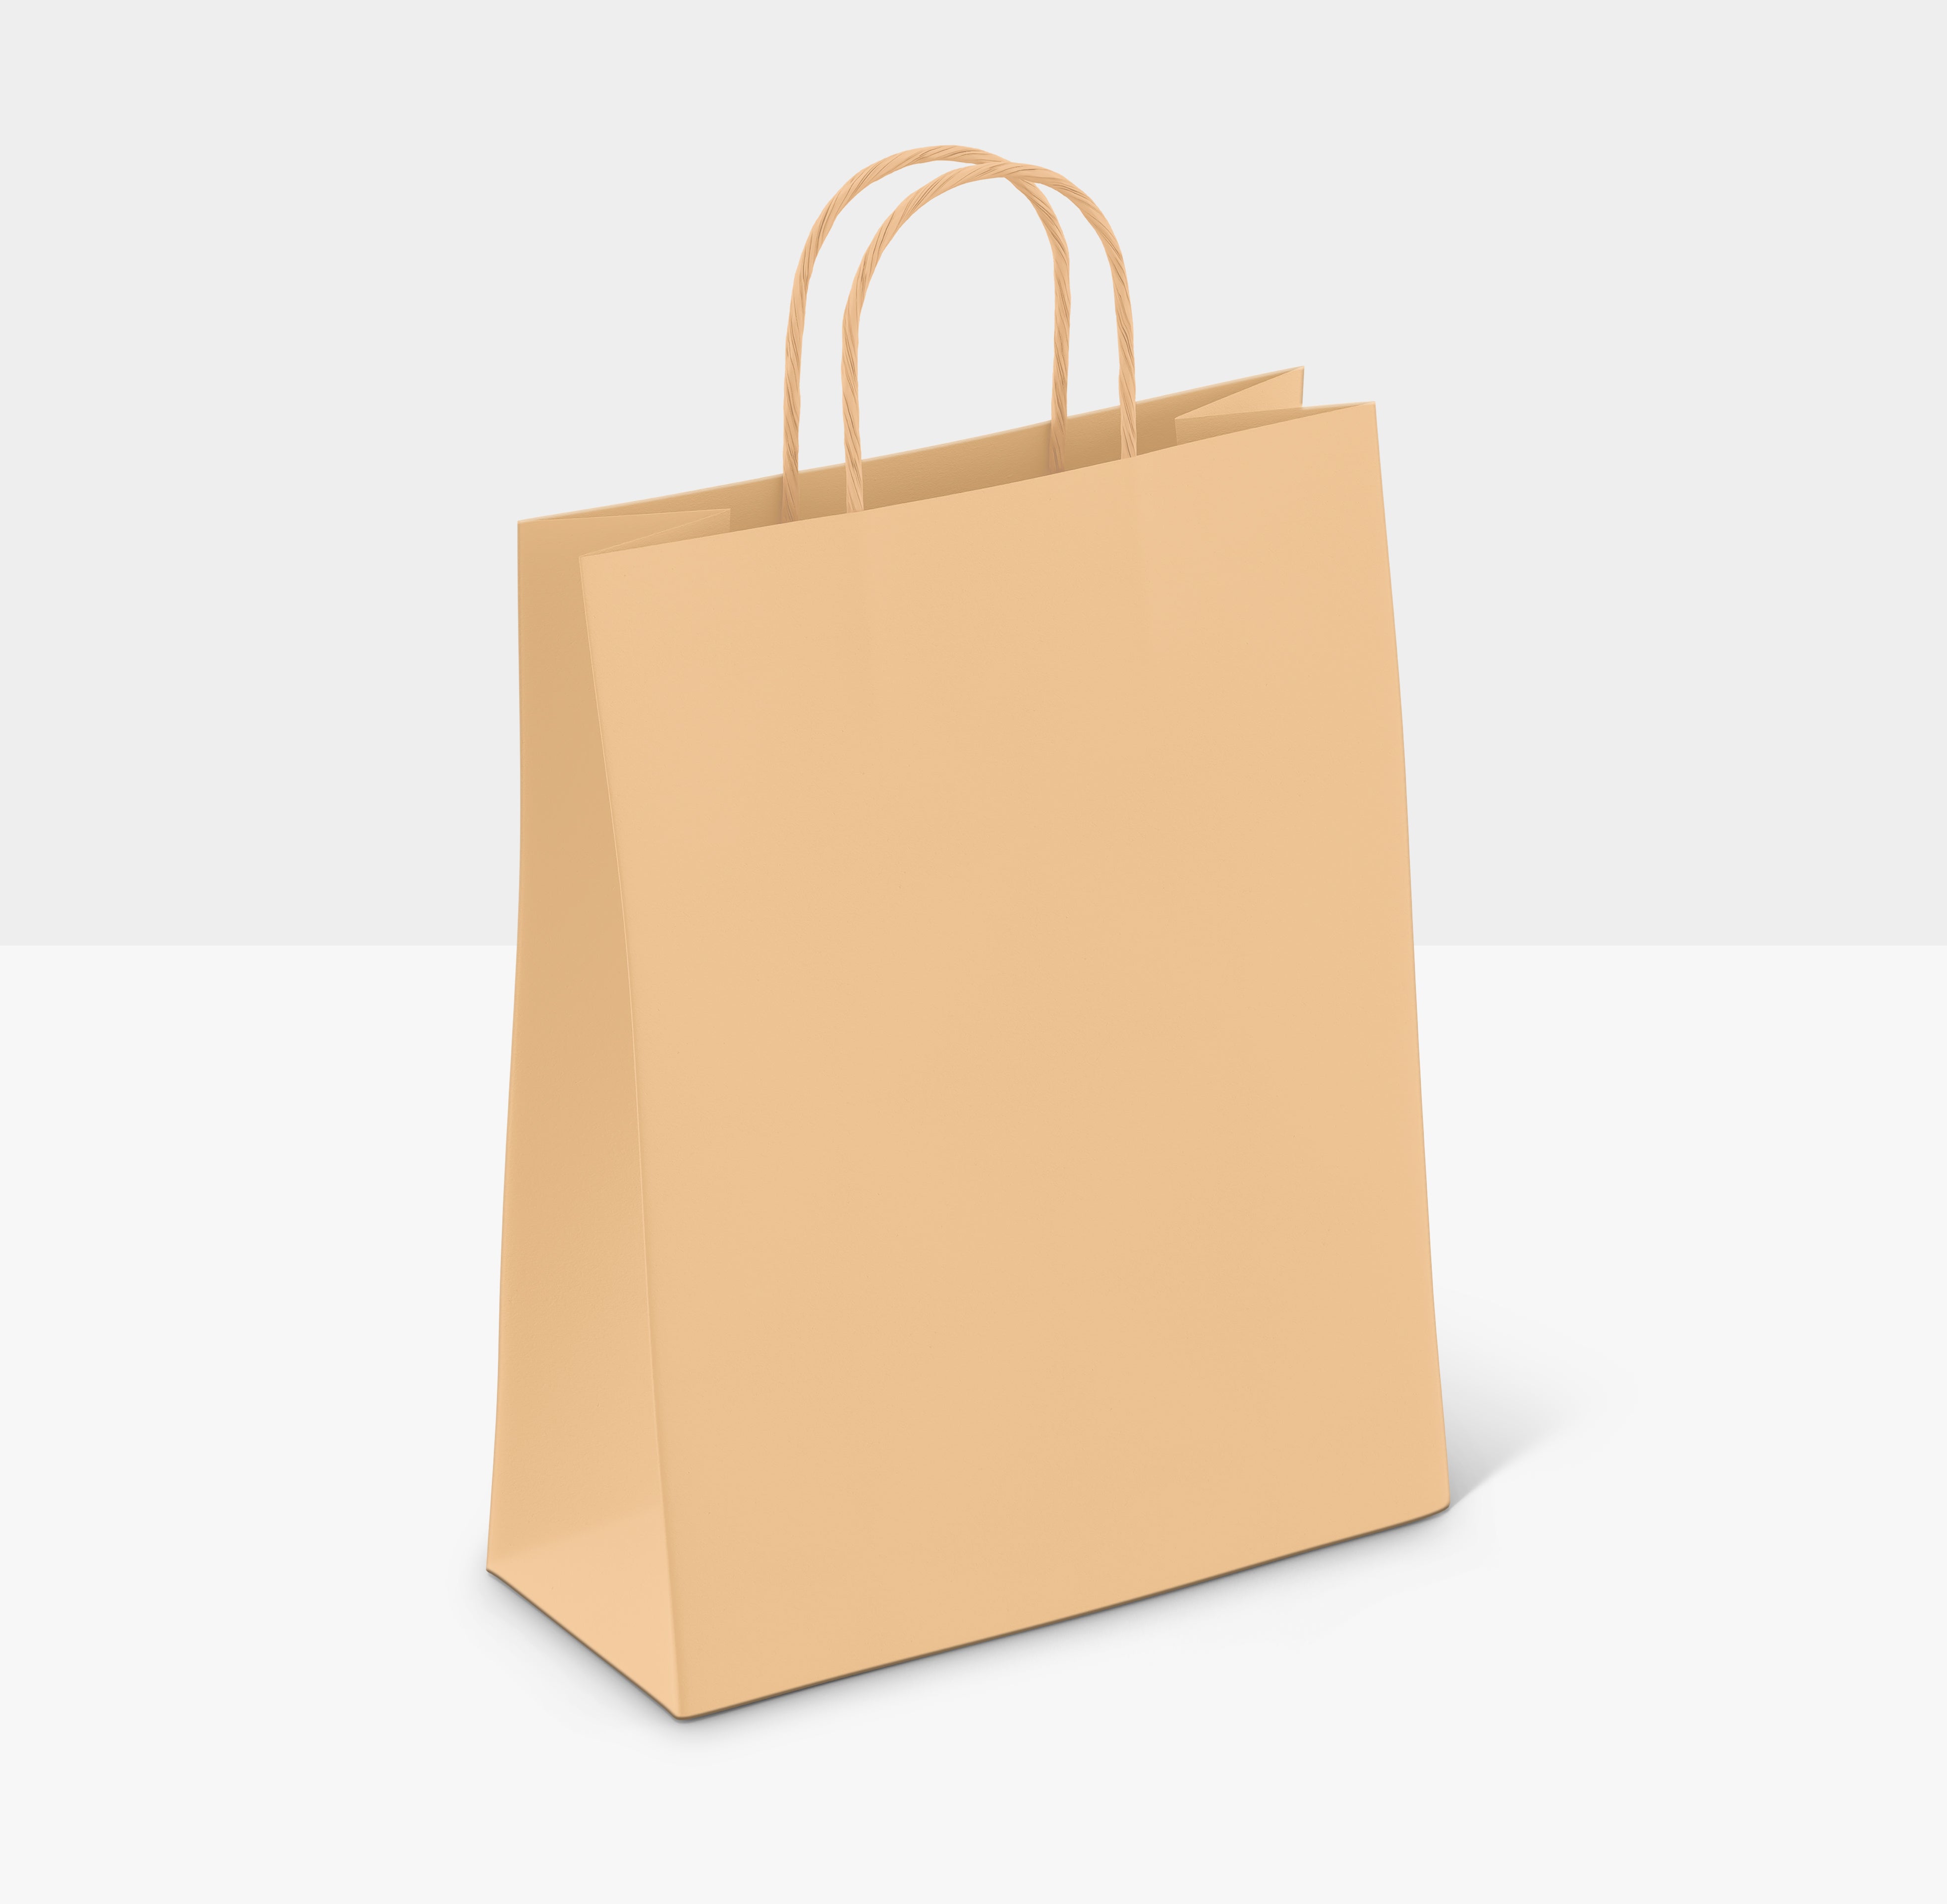 peach-paper-bag-with-handles